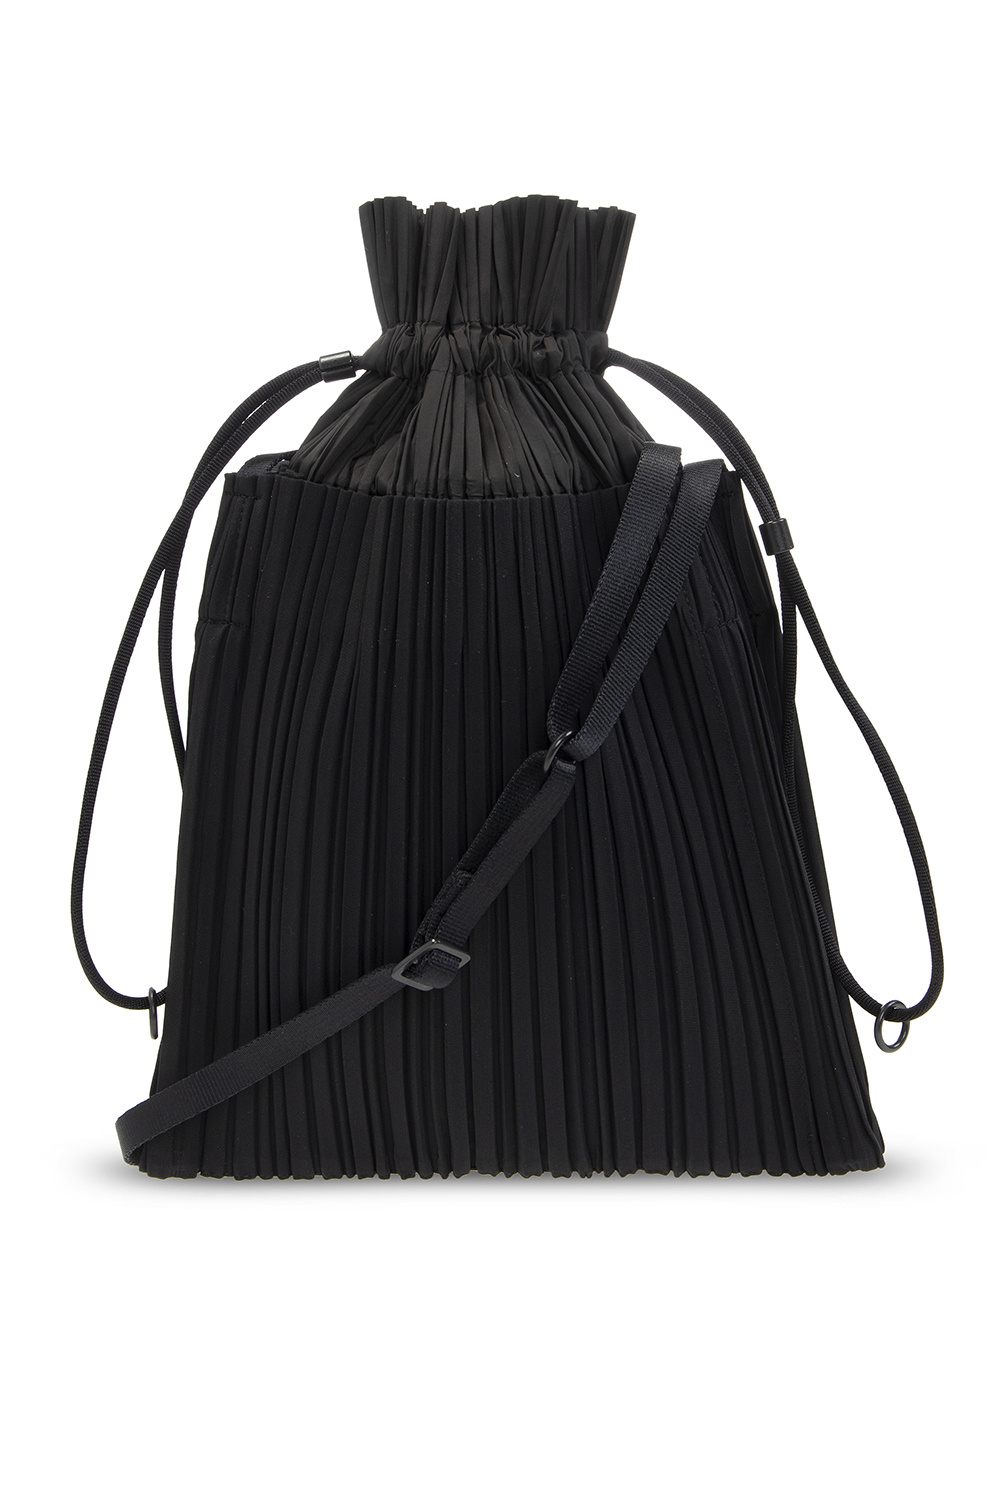 PLEATS PLEASE ISSEY MIYAKE Bags - Women - 19 products